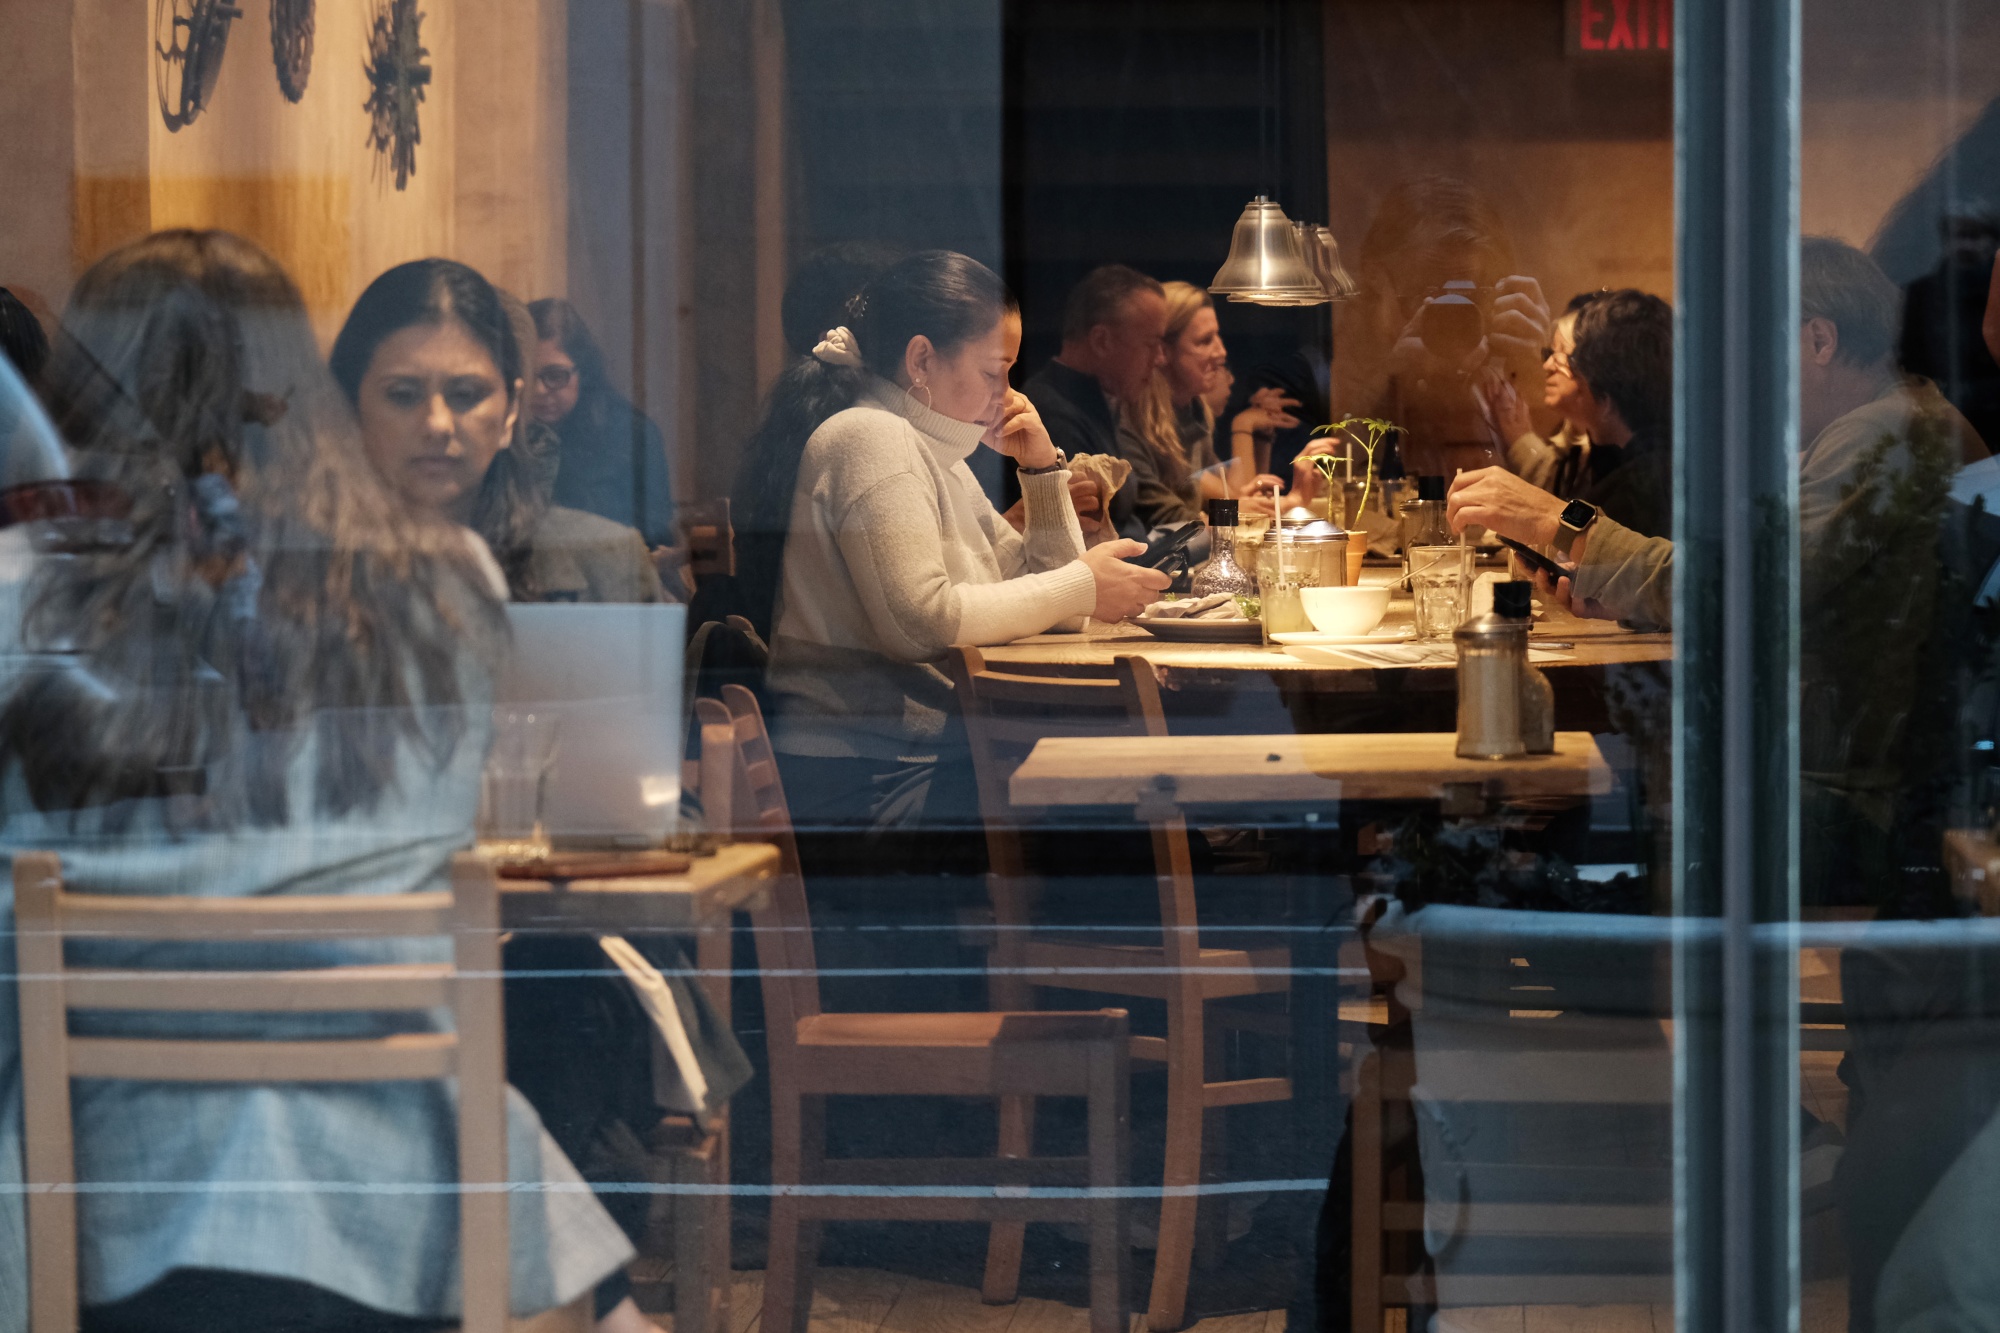 People eat in a Manhattan restaurant on March 9, 2023 in New York City.